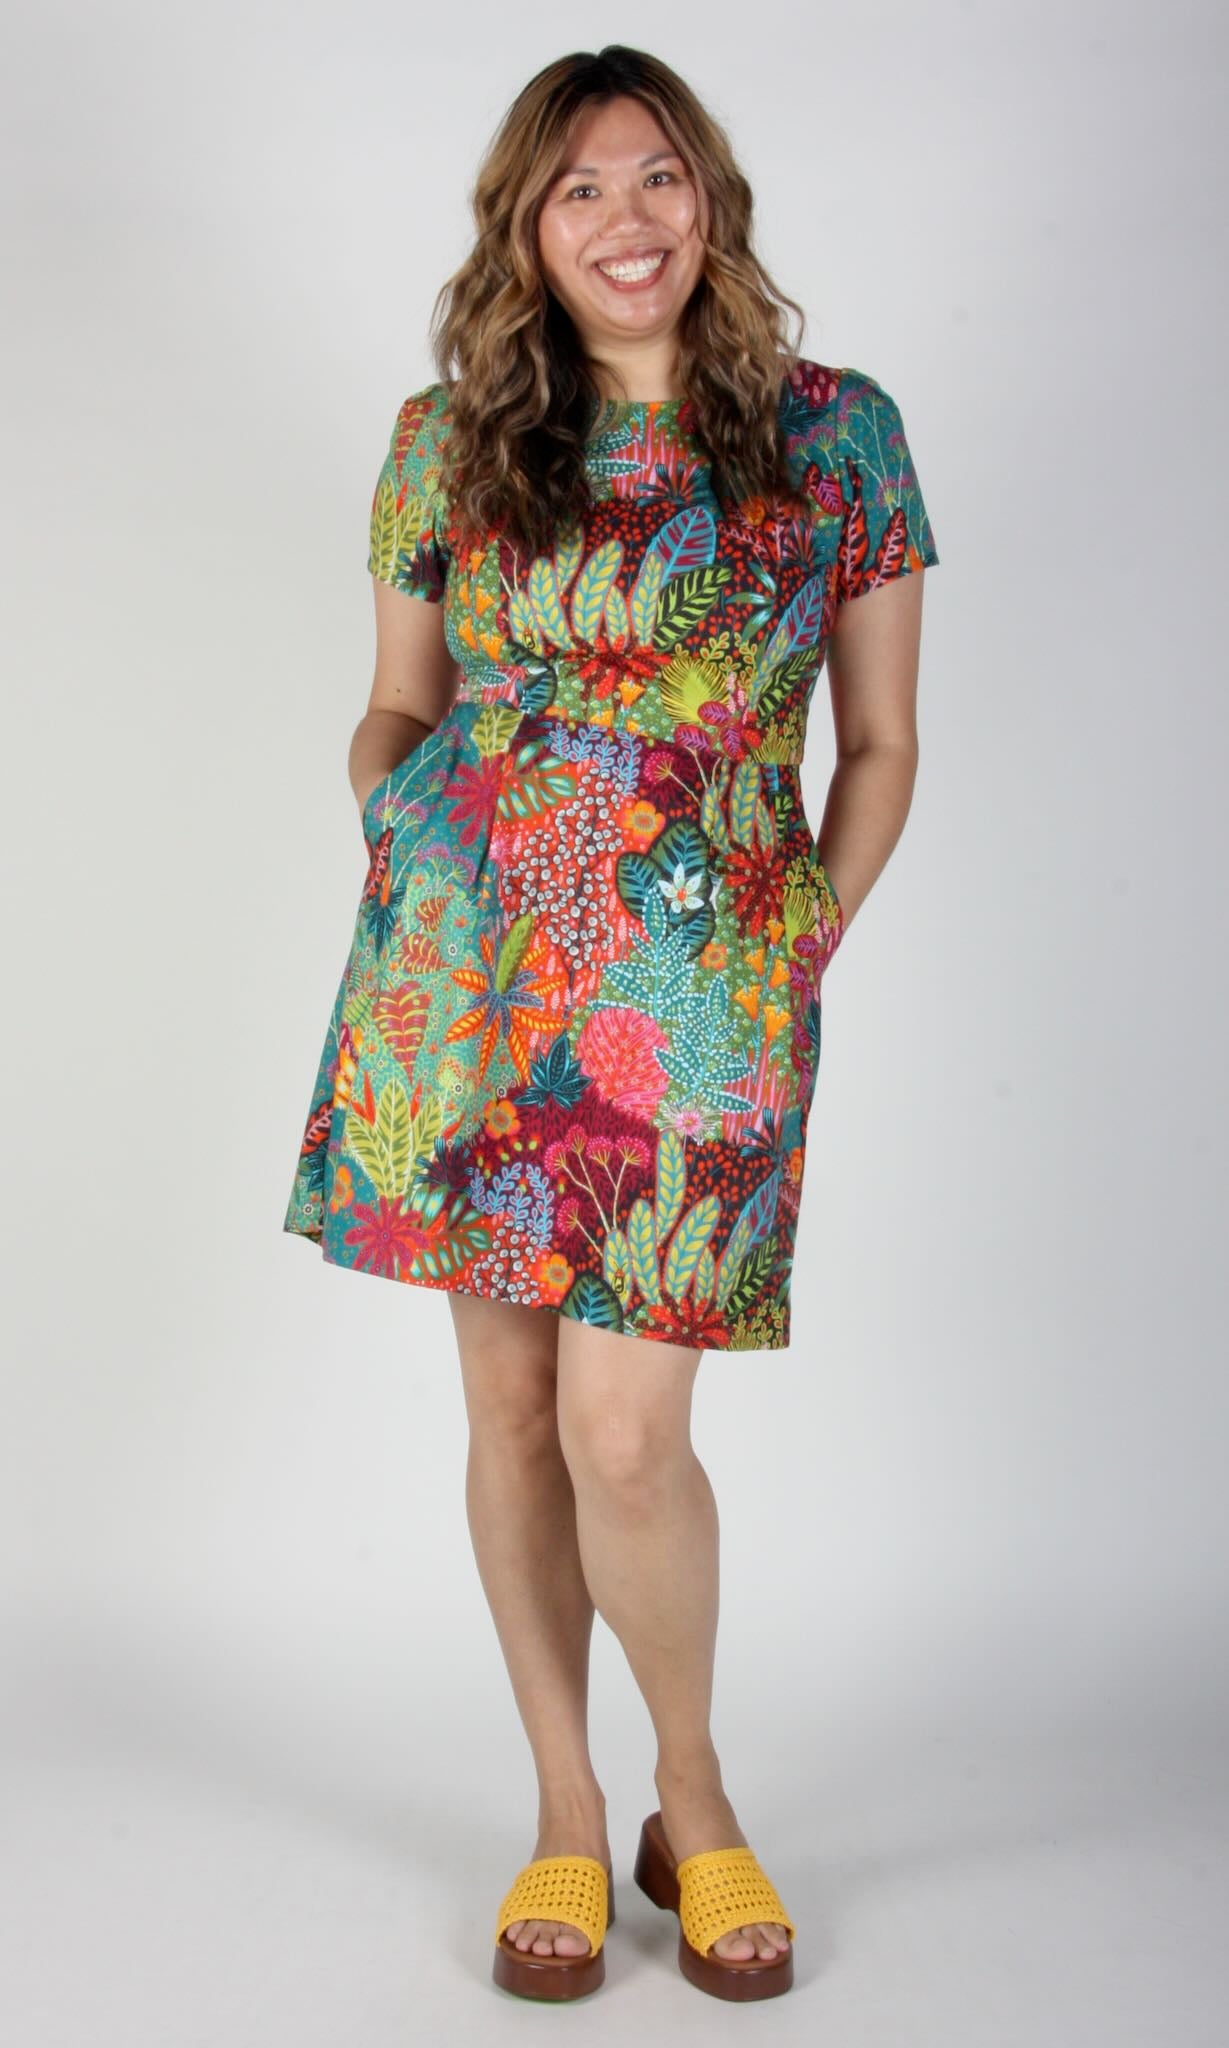 Engoulevent Dress - Shy Menagerie